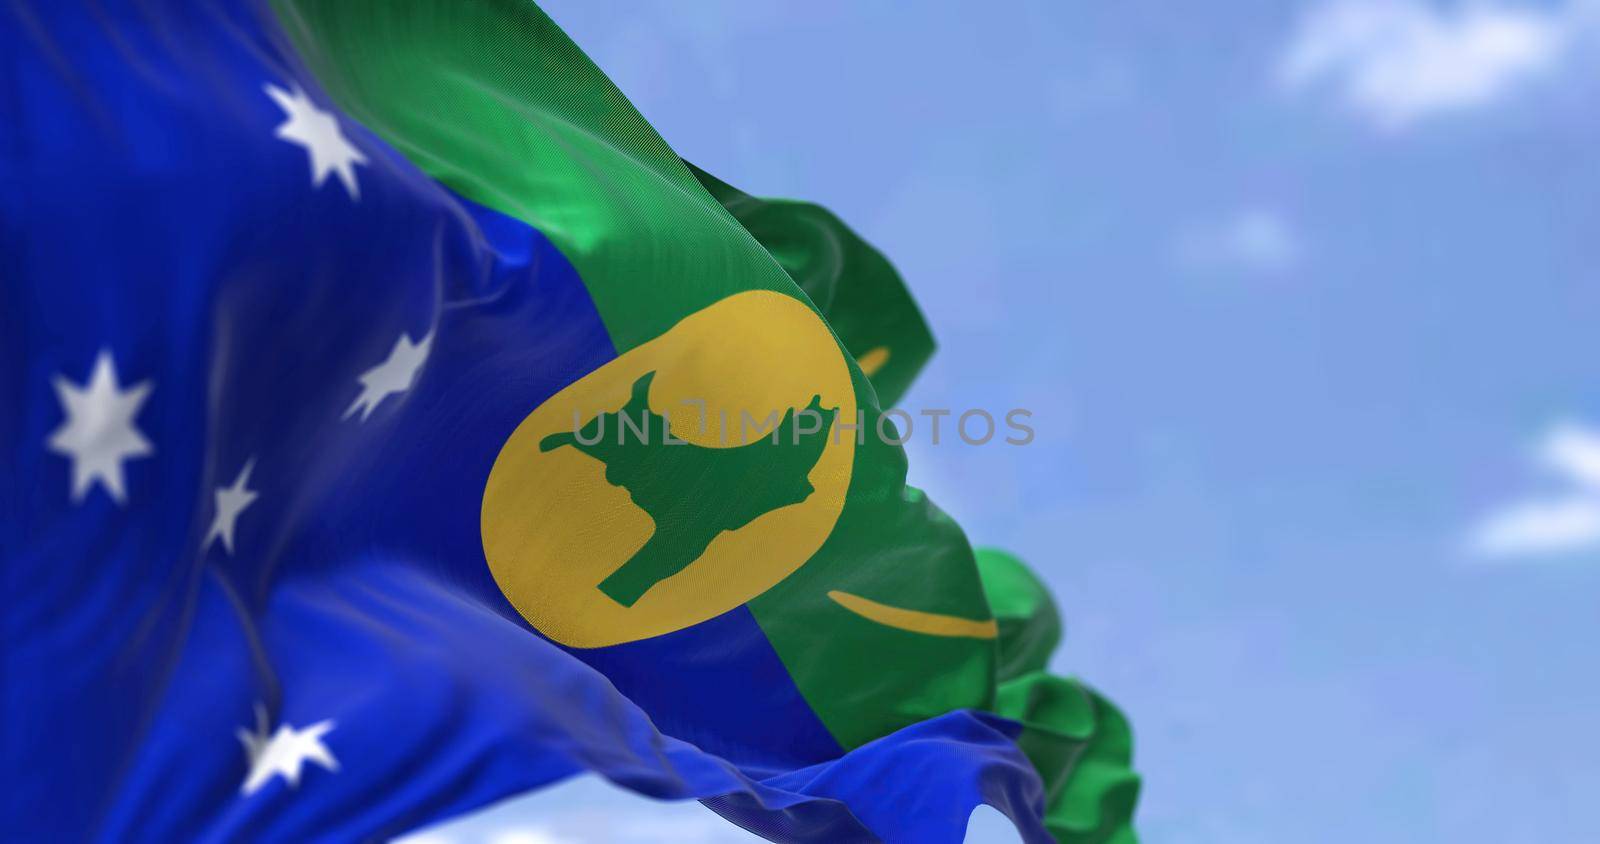 Flag of Christmas Island waving in the wind on a clear day. Christmas Island is an Australian external territory comprising the island of the same name. It is located in the Indian Ocean